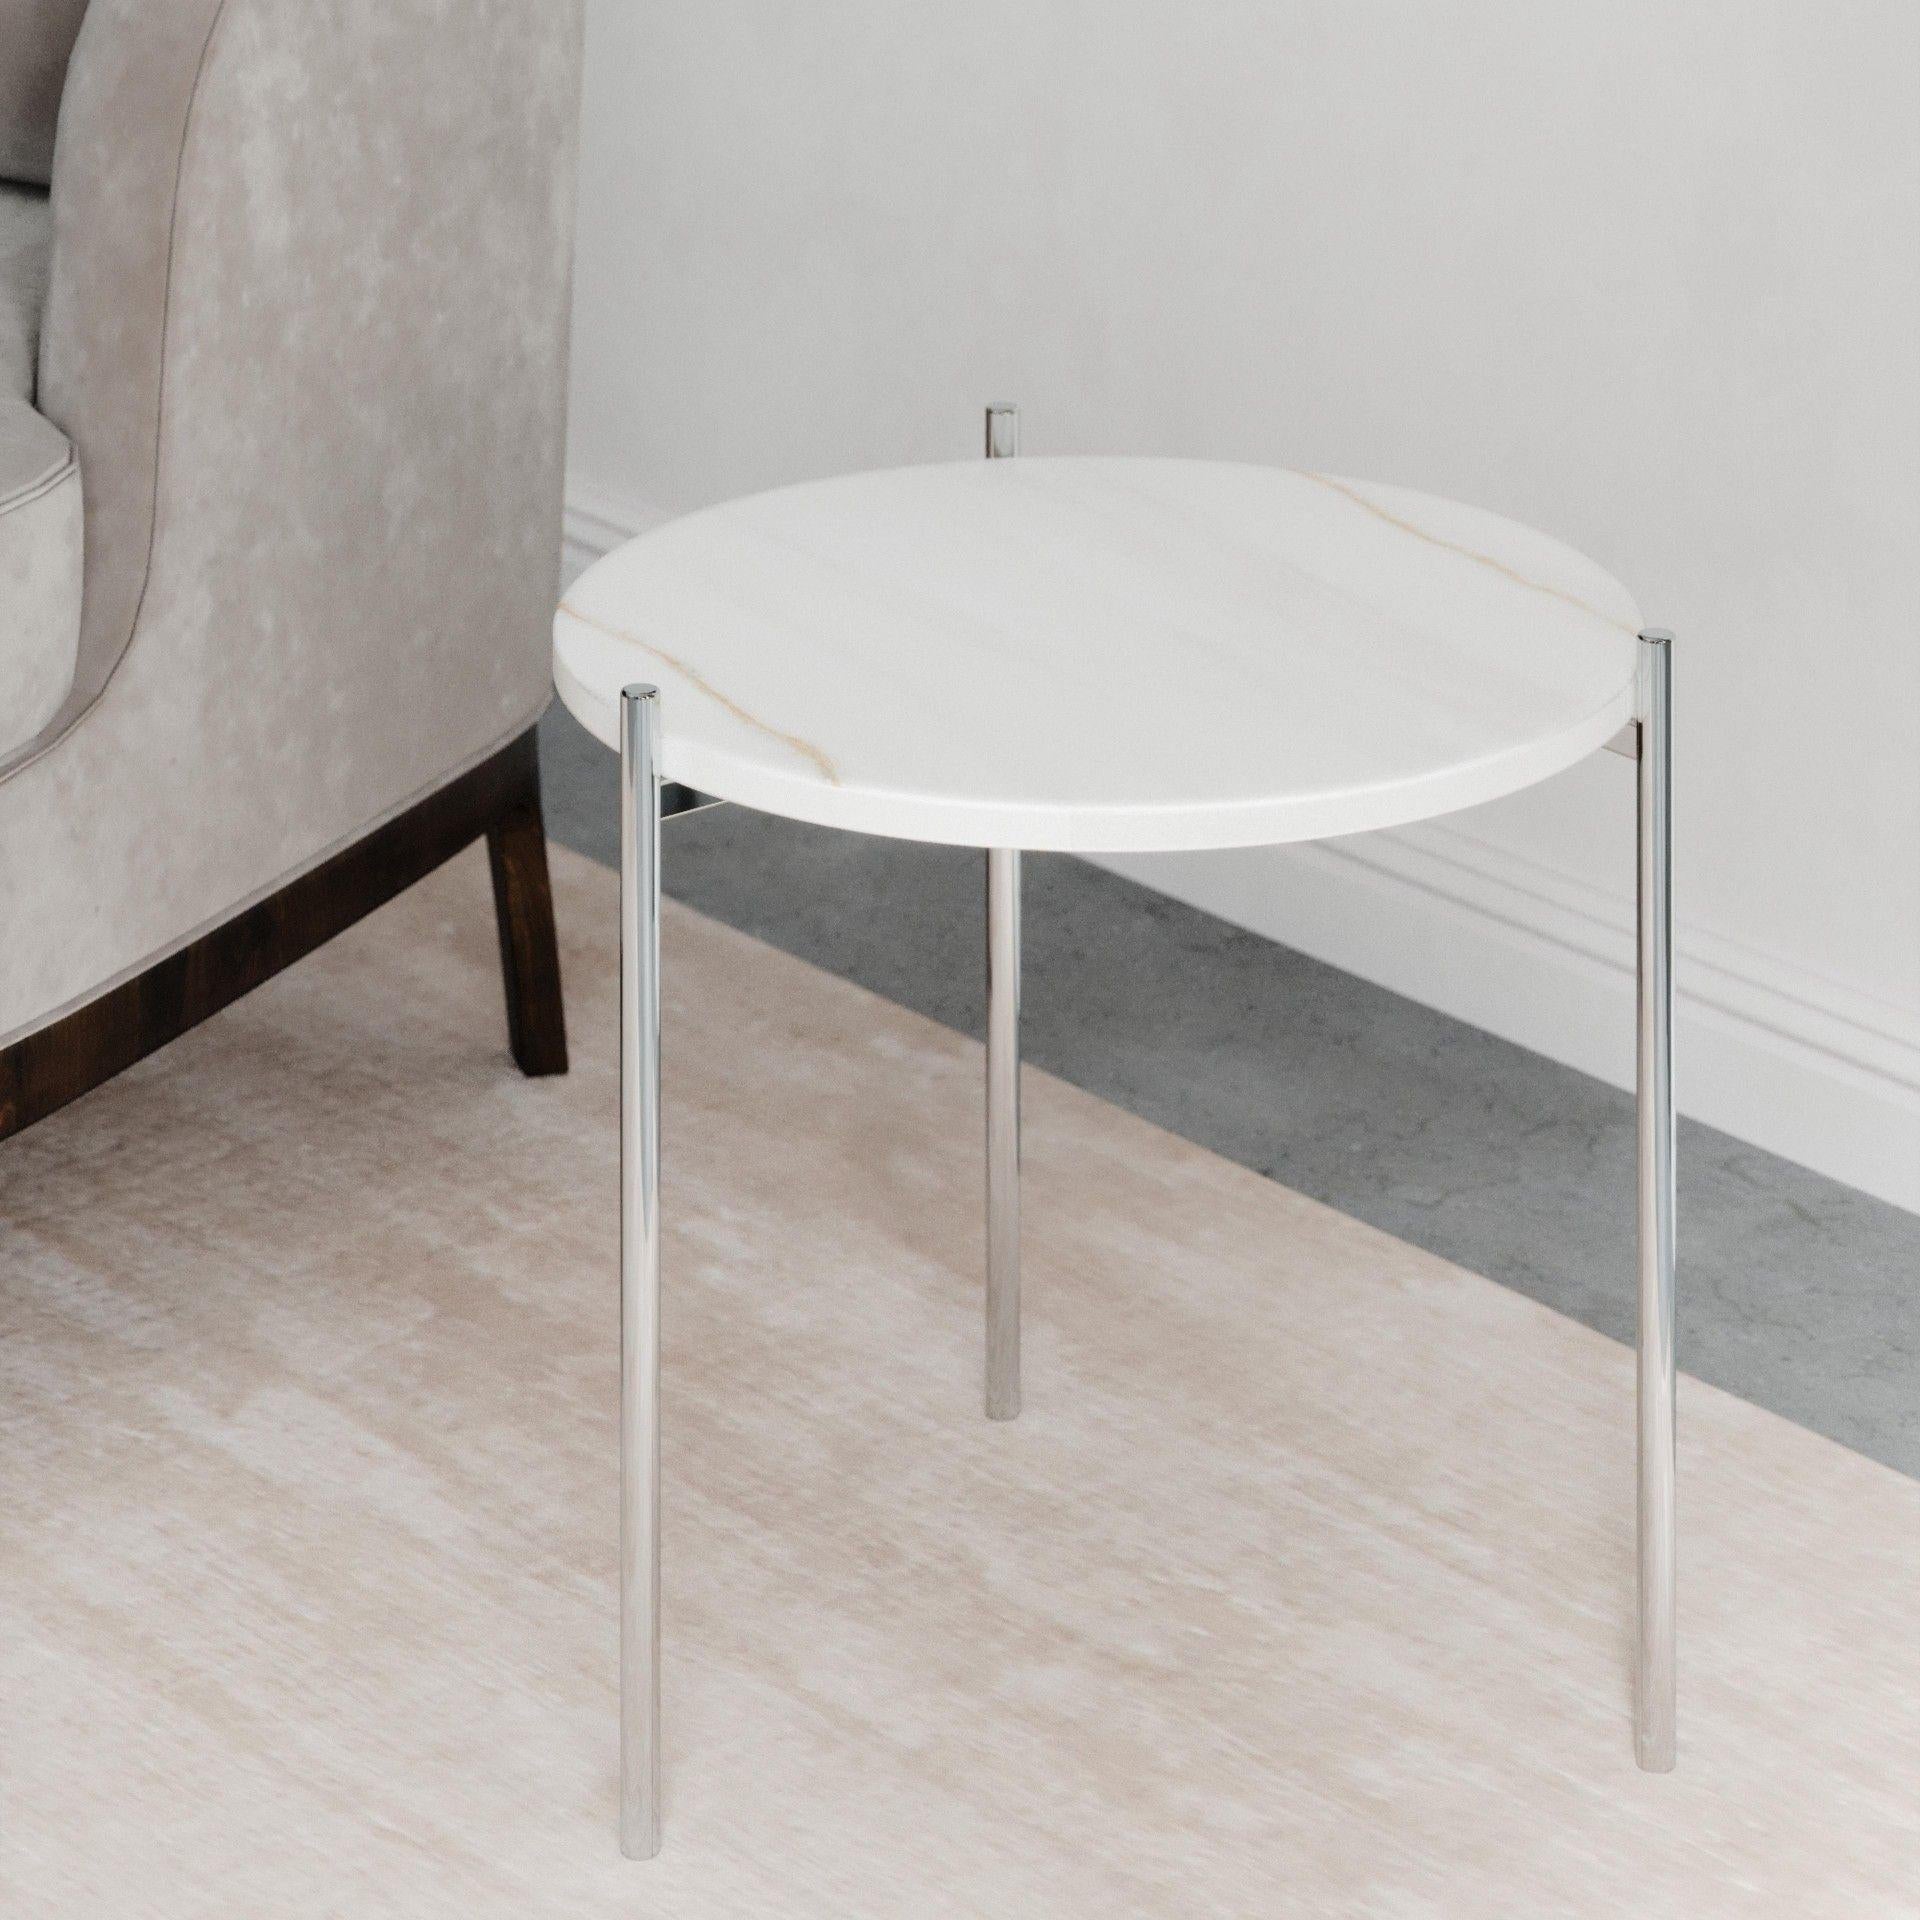 Pair of White Marble Stainless Steel Side Tables In New Condition For Sale In Paris, FR